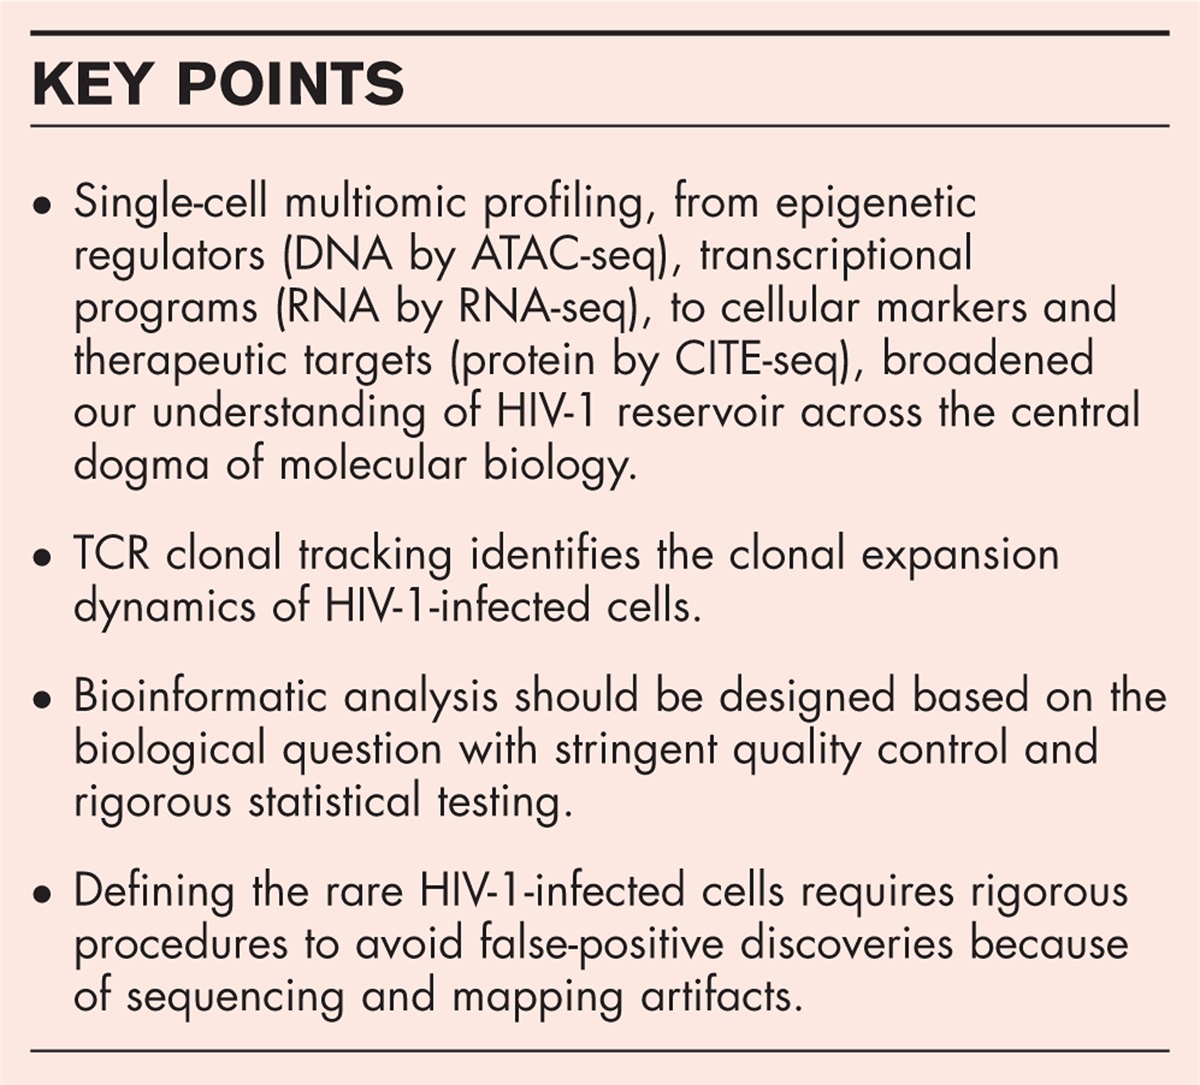 Single-cell multiomic understanding of HIV-1 reservoir at epigenetic, transcriptional, and protein levels